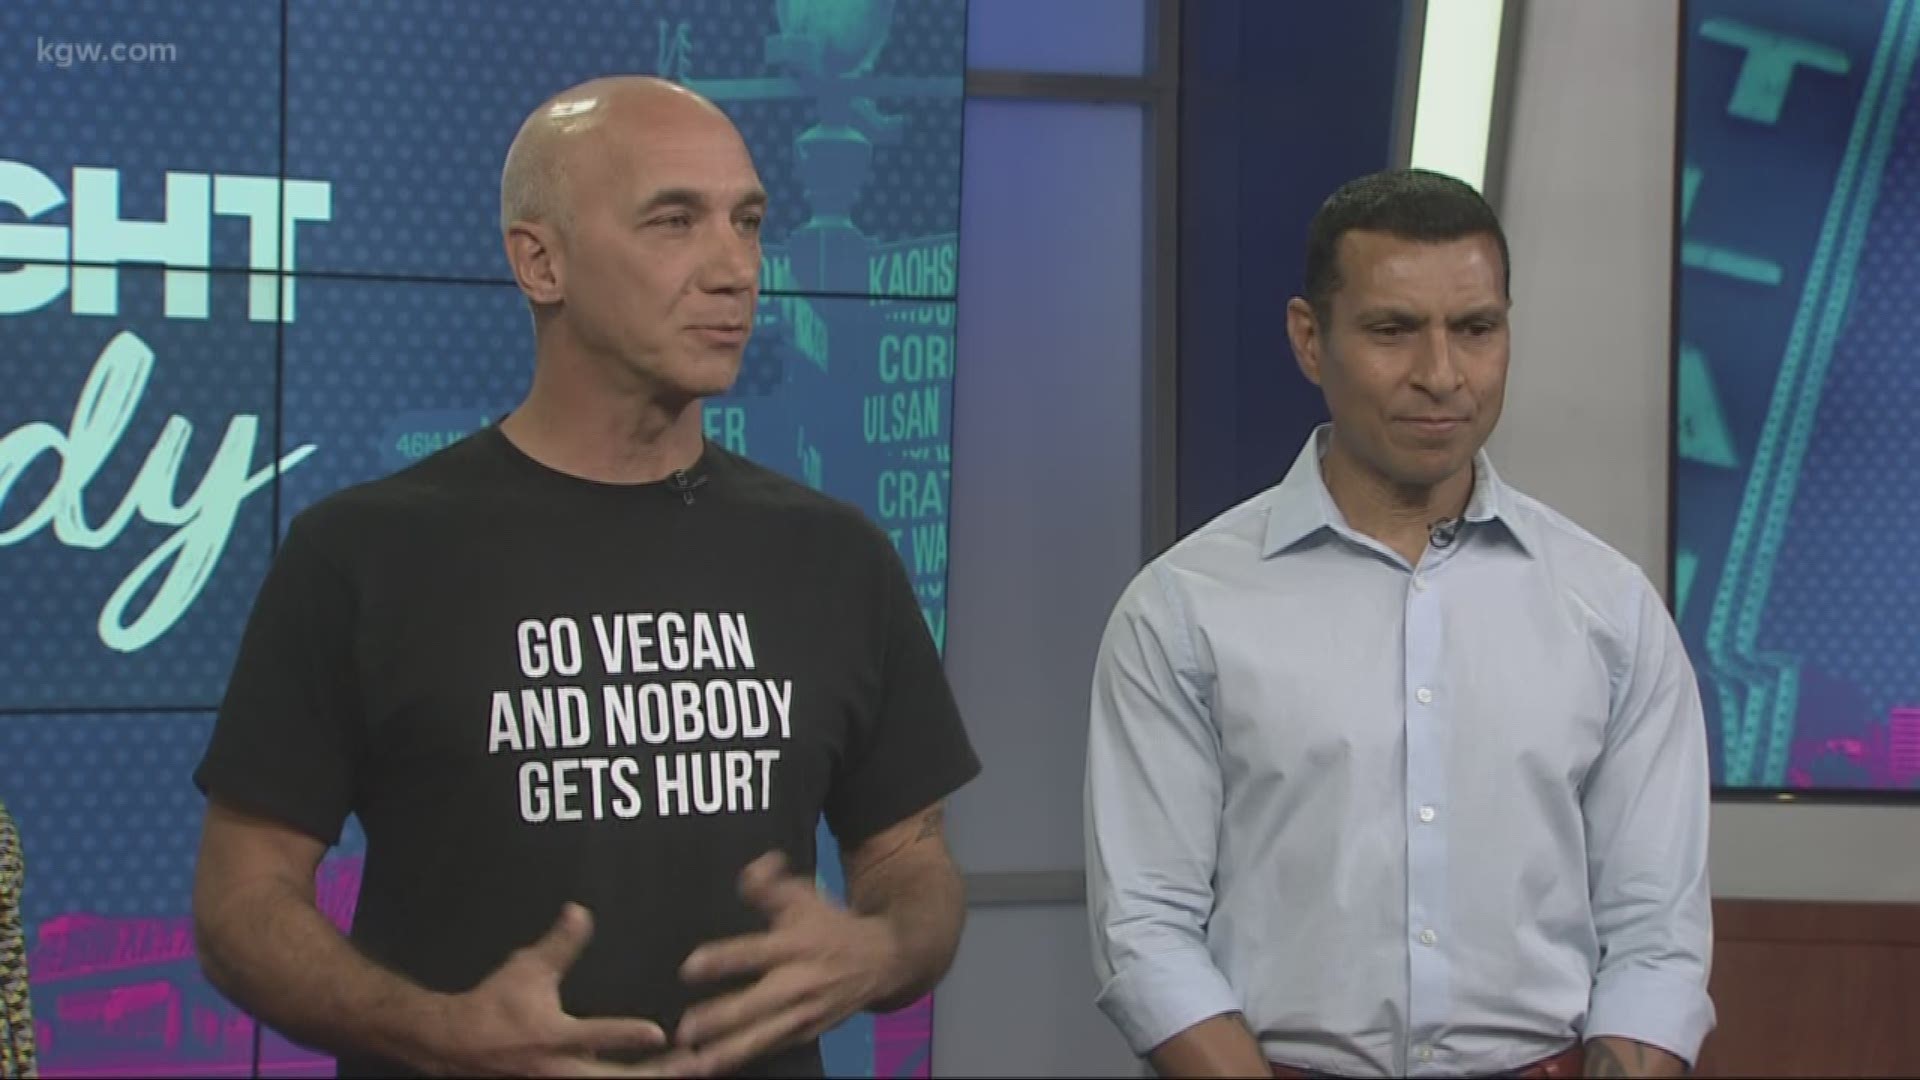 Tim Medearis and Omar Ordonez are finalists in PETA's "Sexiest Vegan Over 50" contest. Cast your vote by Sept. 27th.
#TonightwithCassidy
prime.peta.org